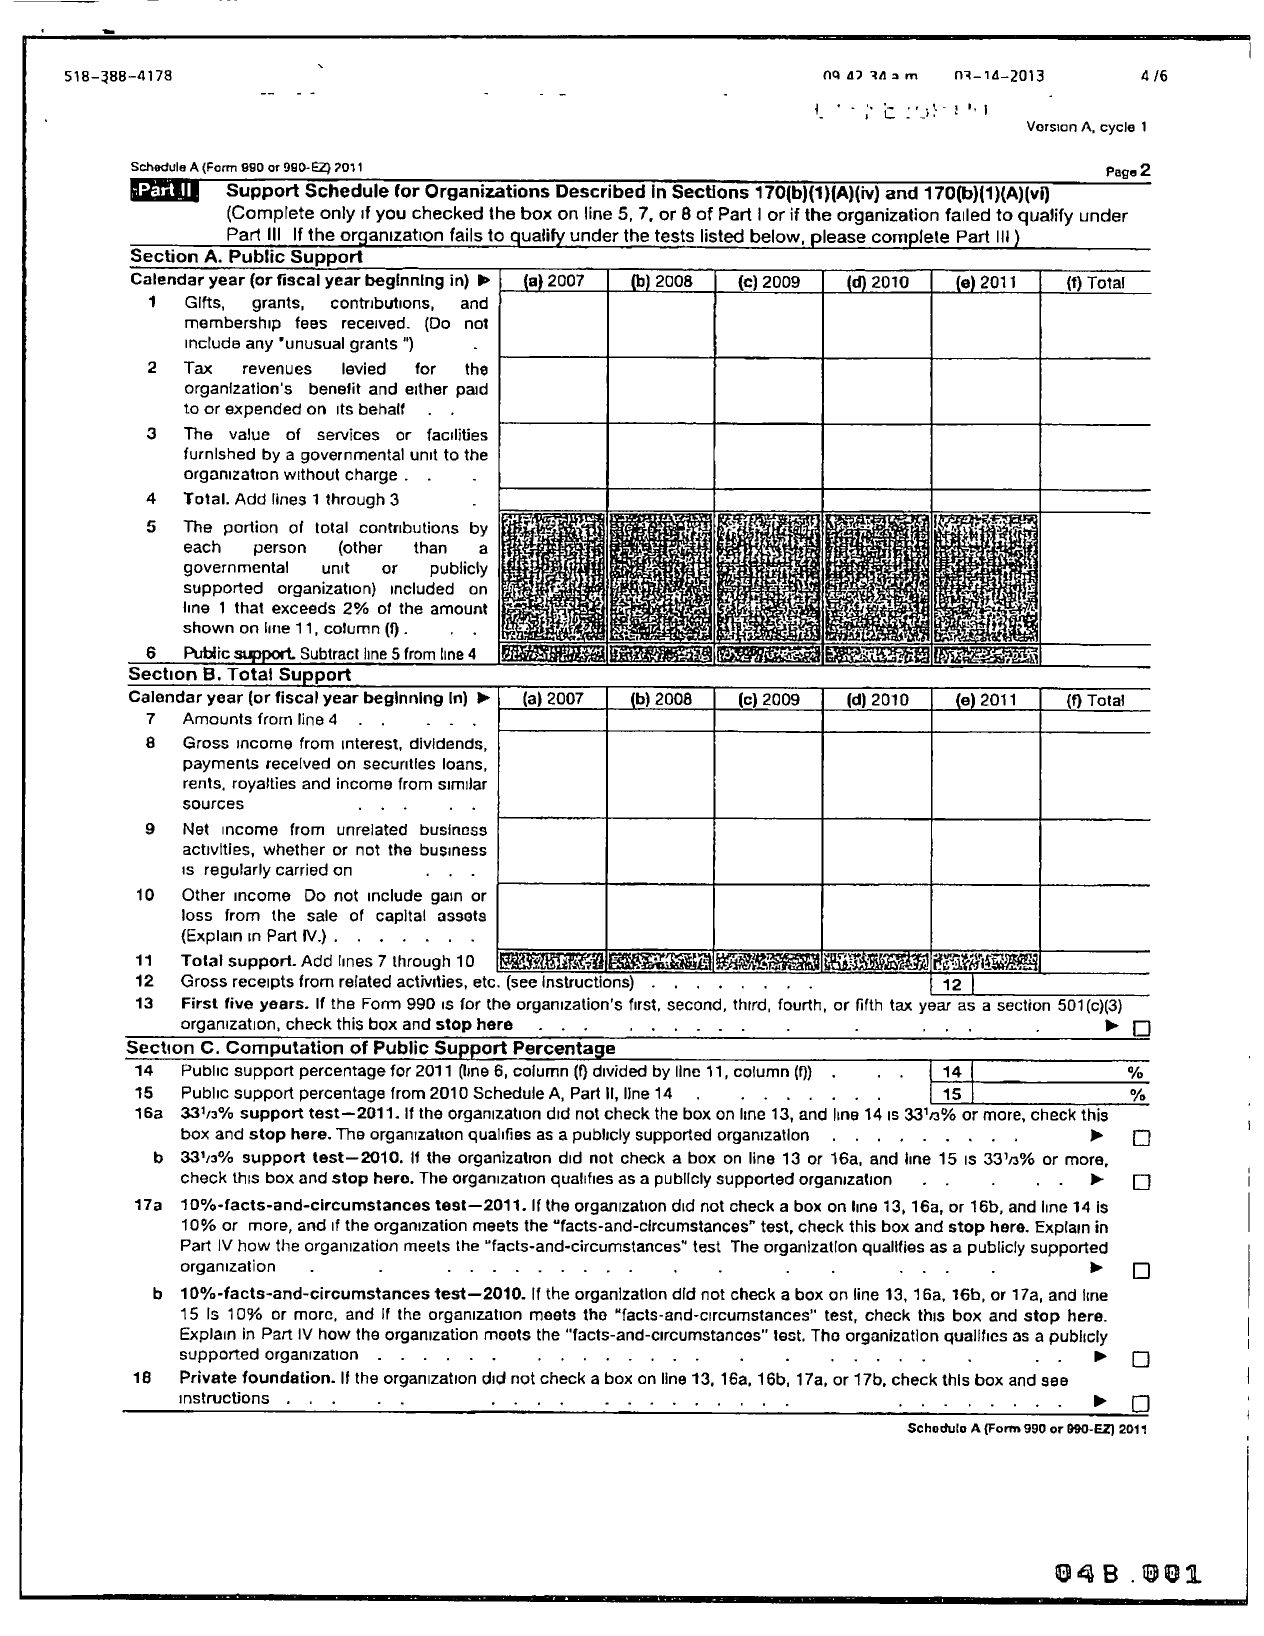 Image of first page of 2011 Form 990ER for New York State PTA - 12-319 Tesago PTA